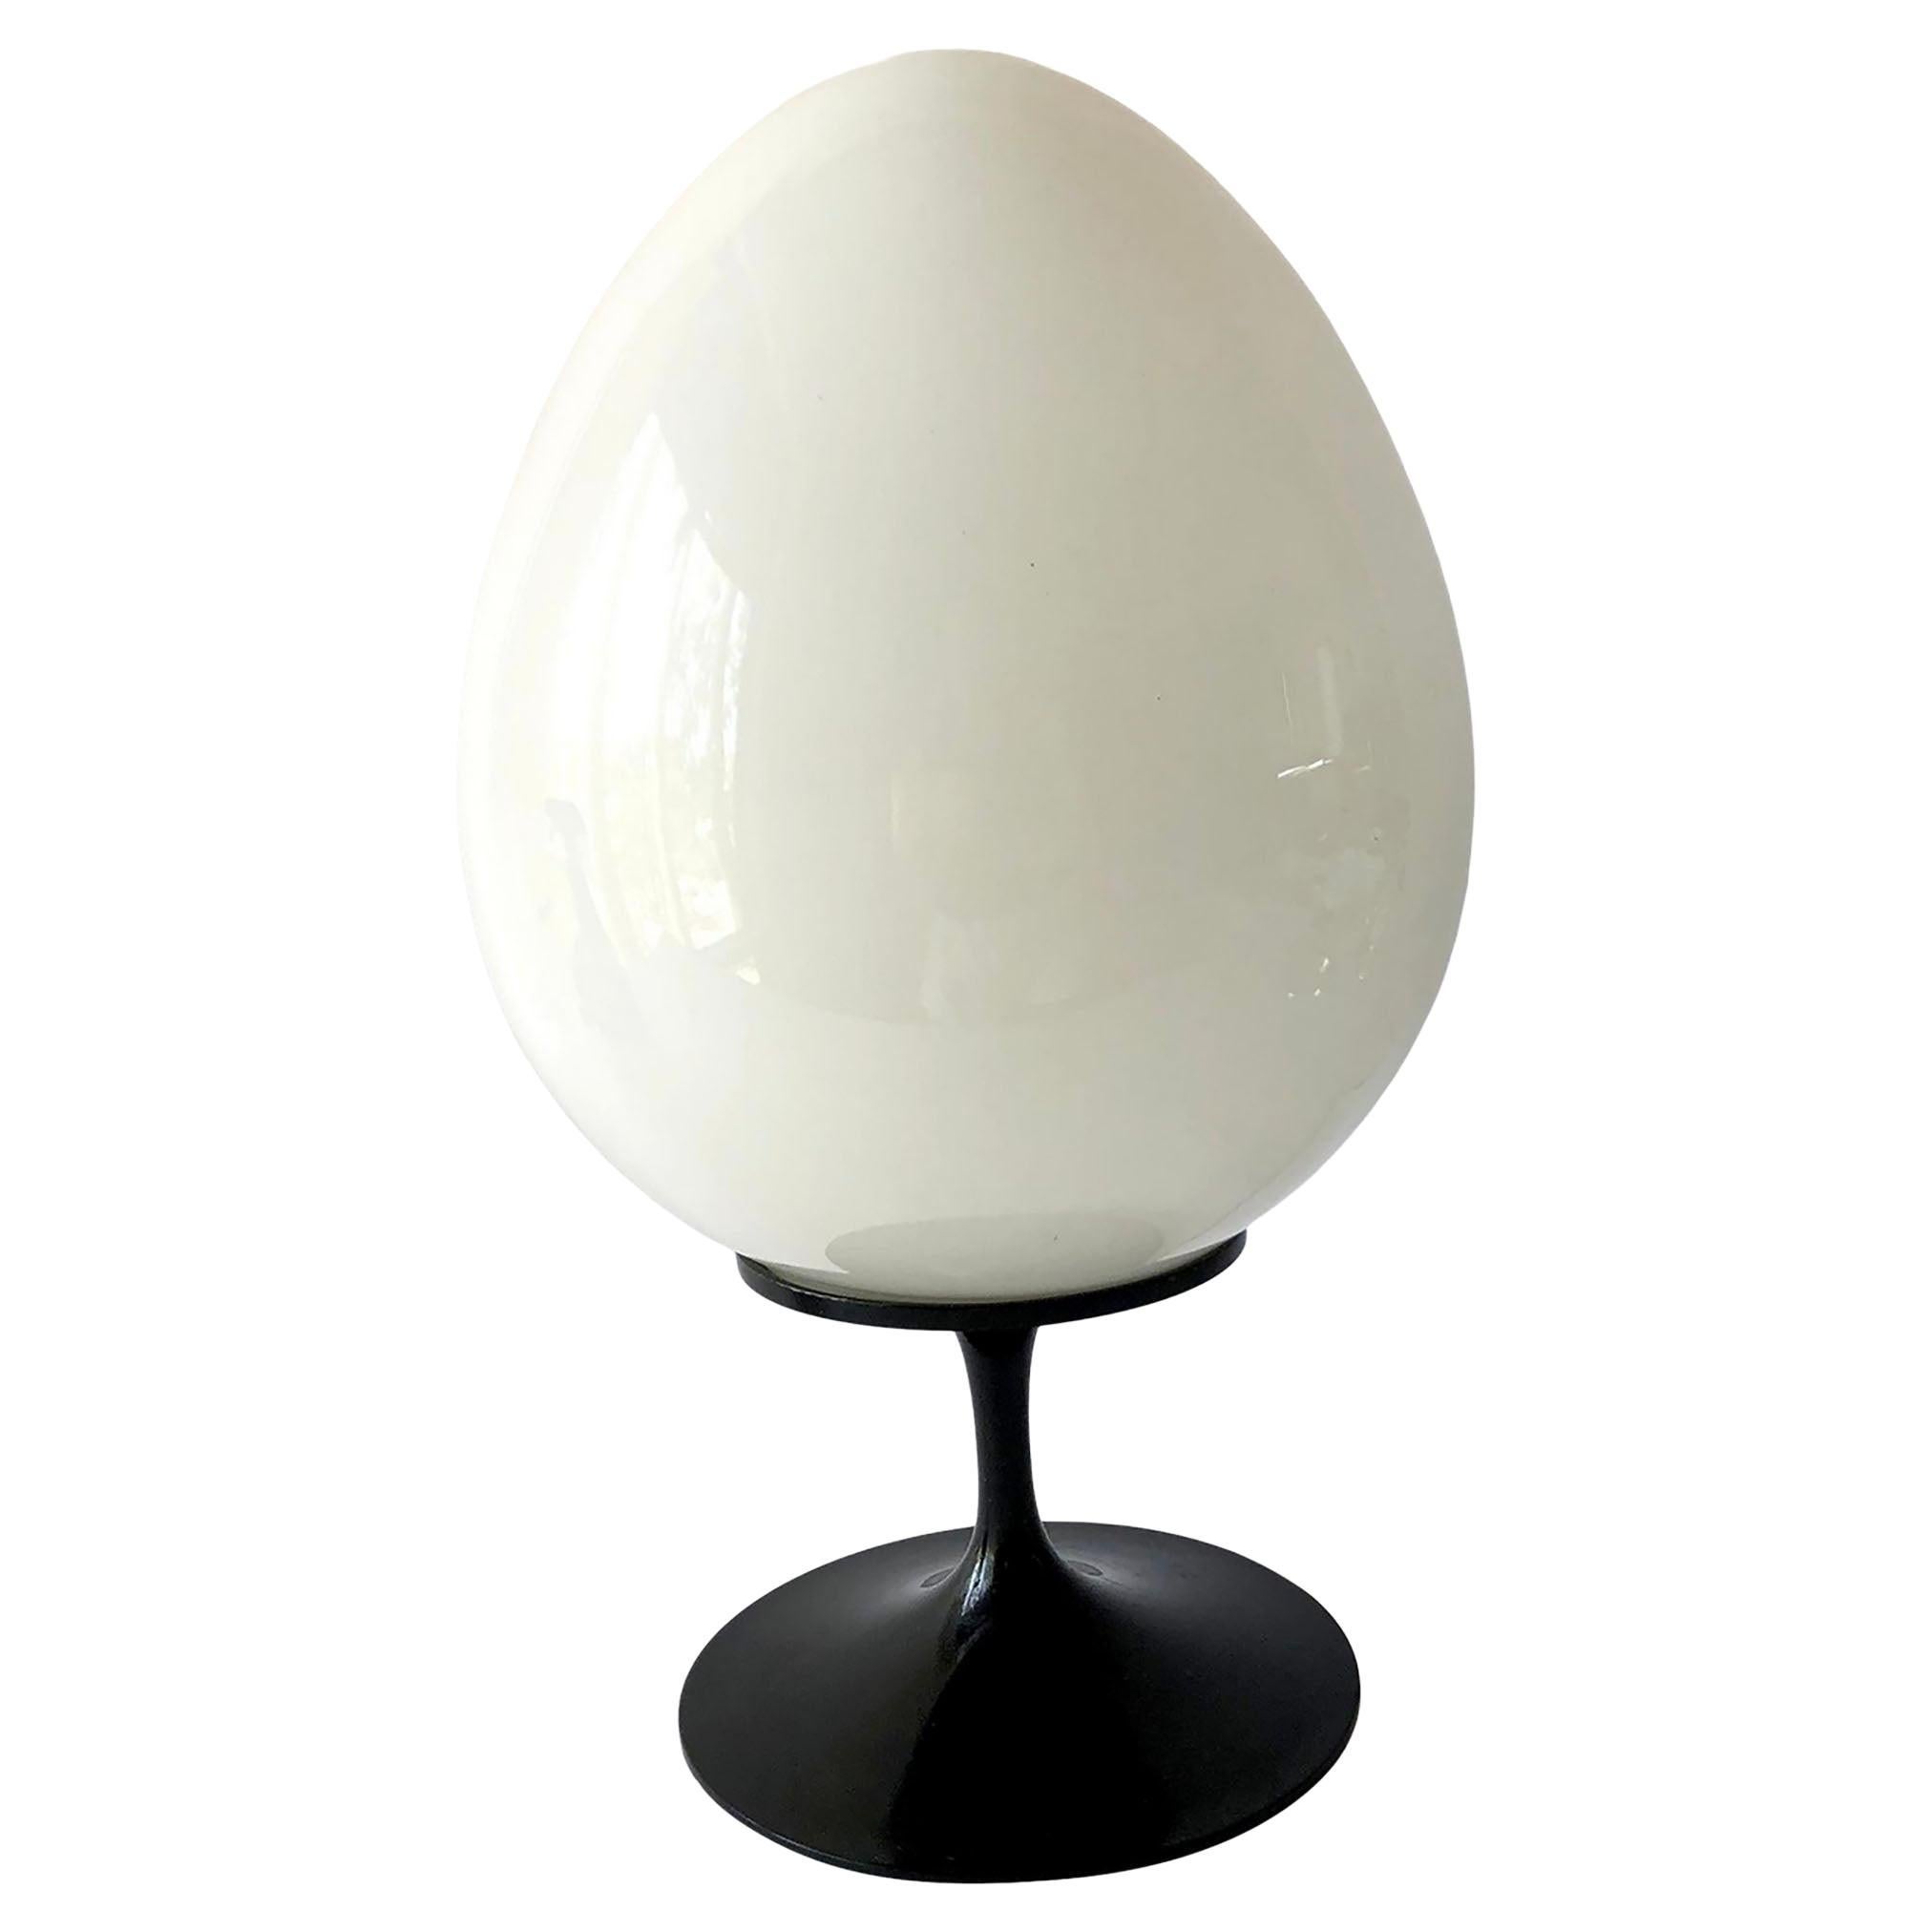 Bill Curry for Design Line Stemlite Table Lamp with Glass Egg Shade